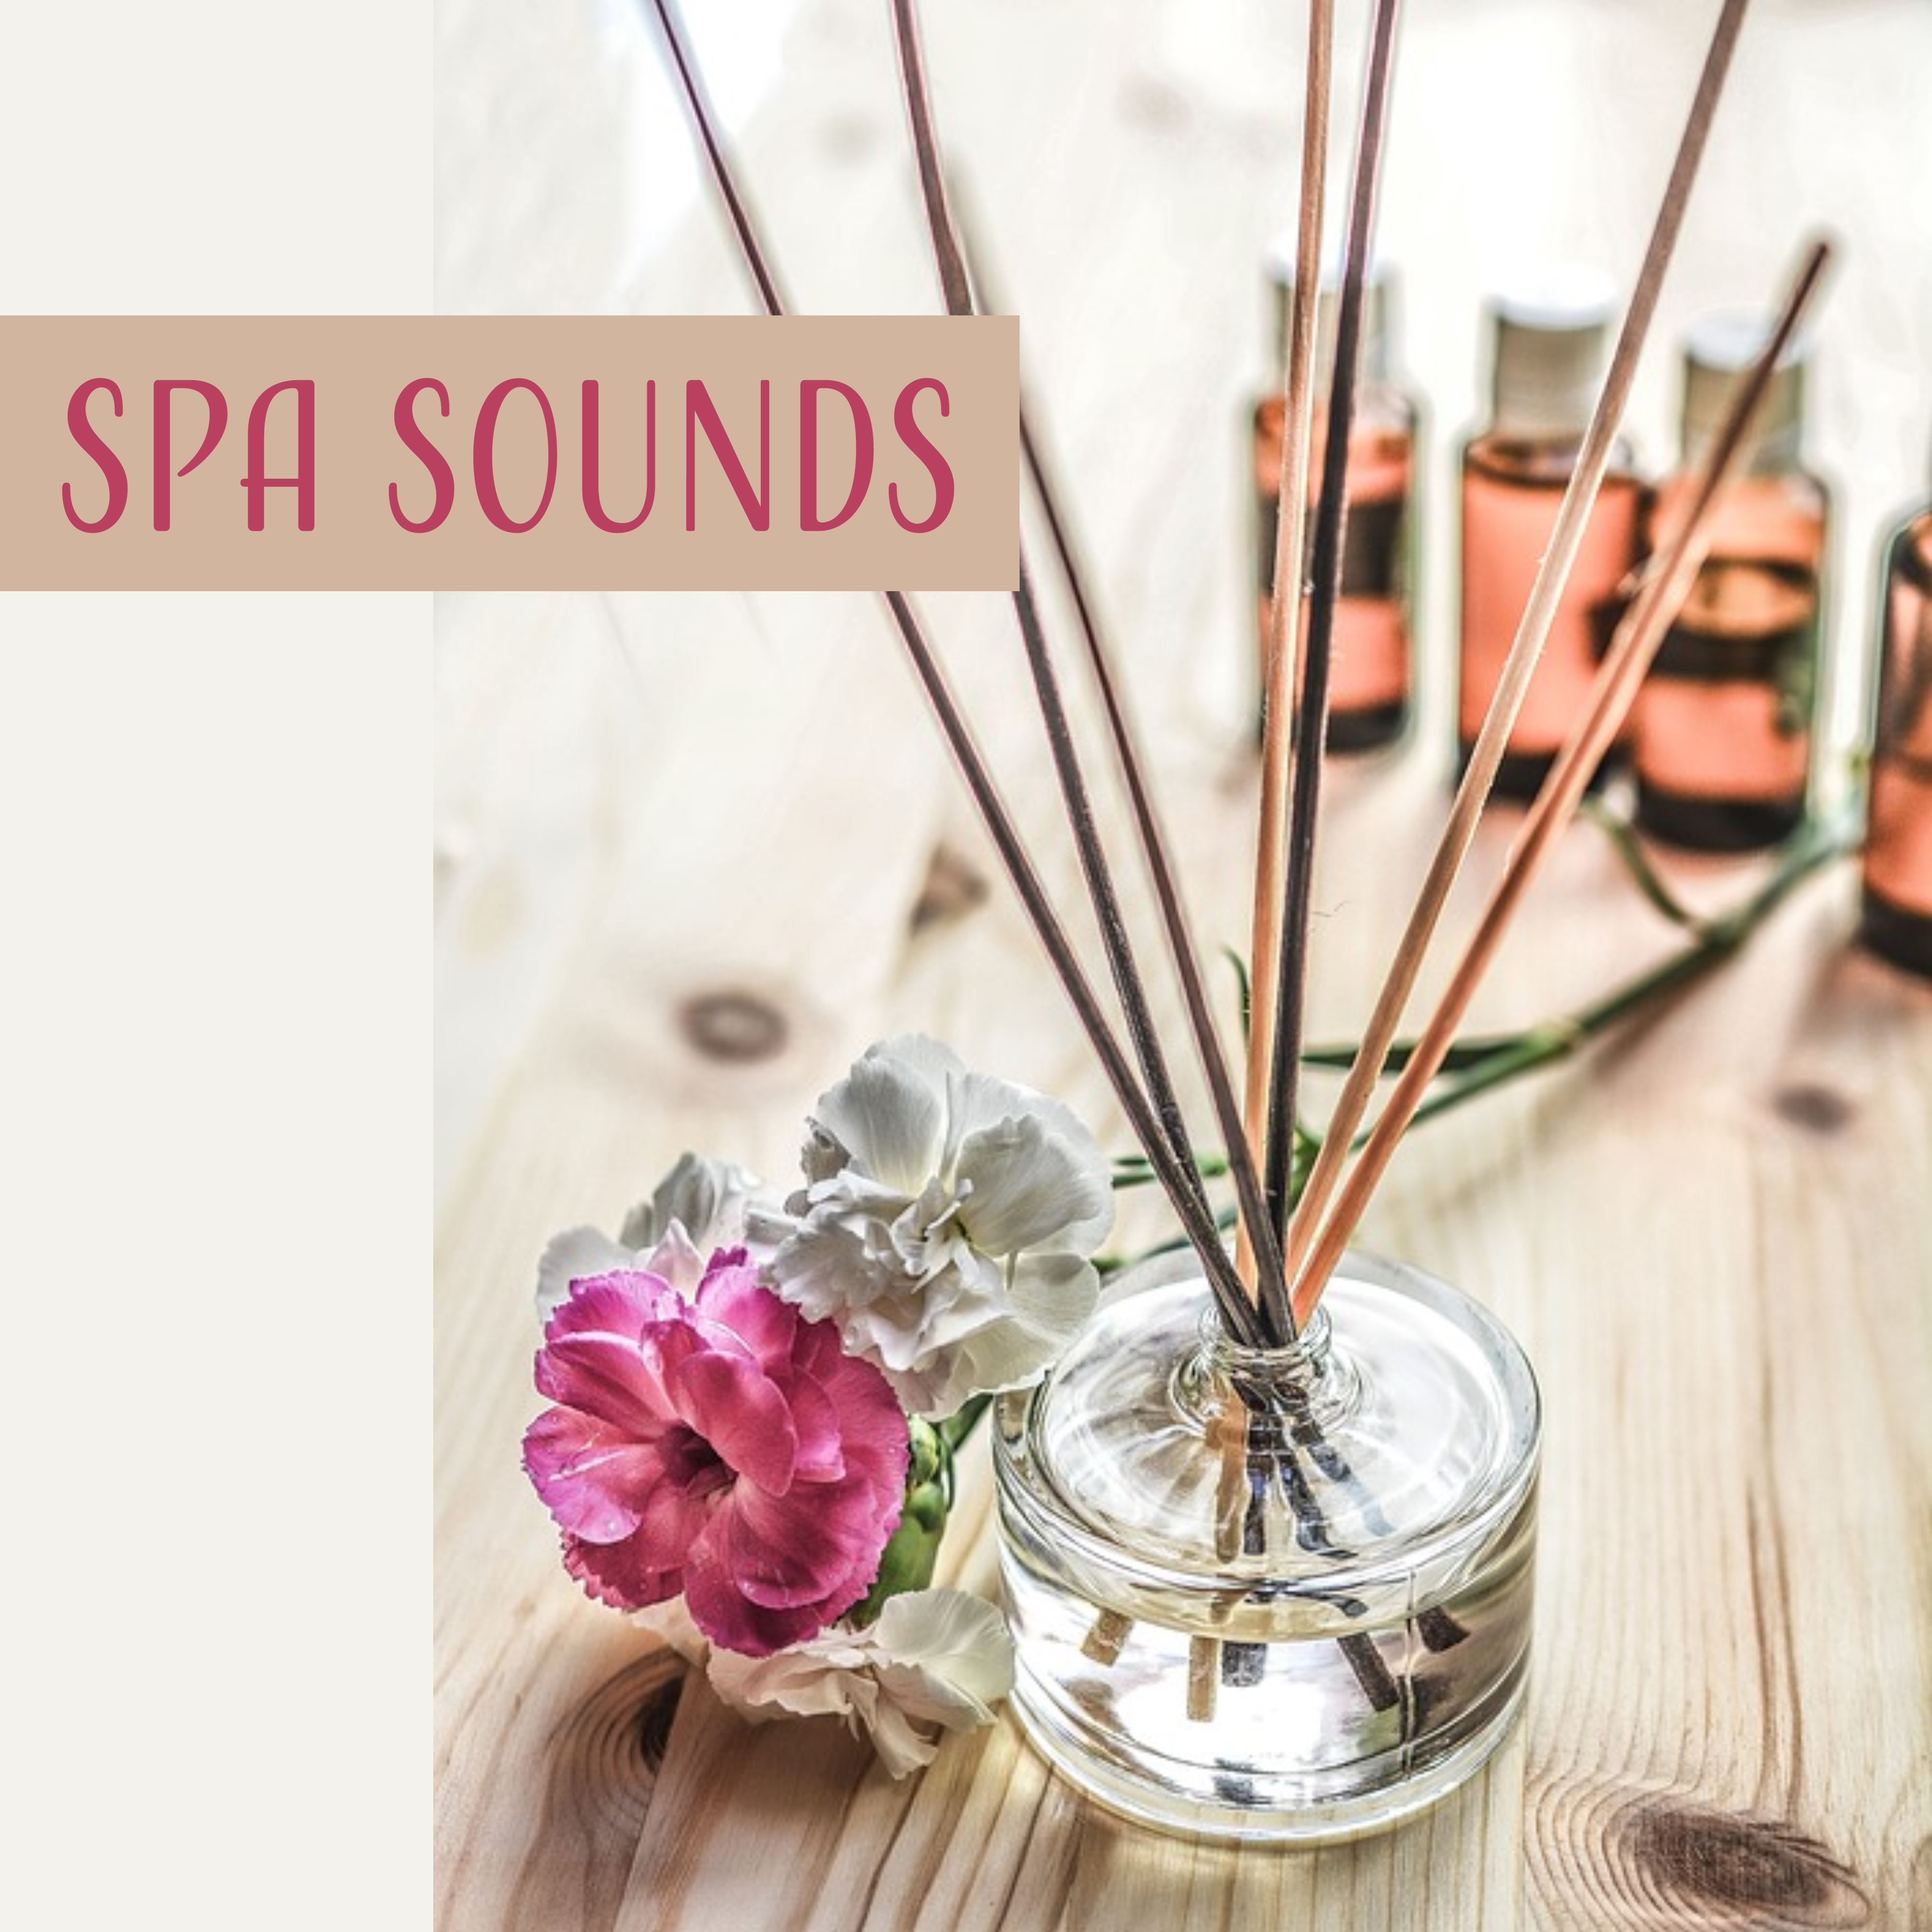 Spa Sounds  Spa Background Music, Full of Nature Sounds, New Age Music, Bird Sounds